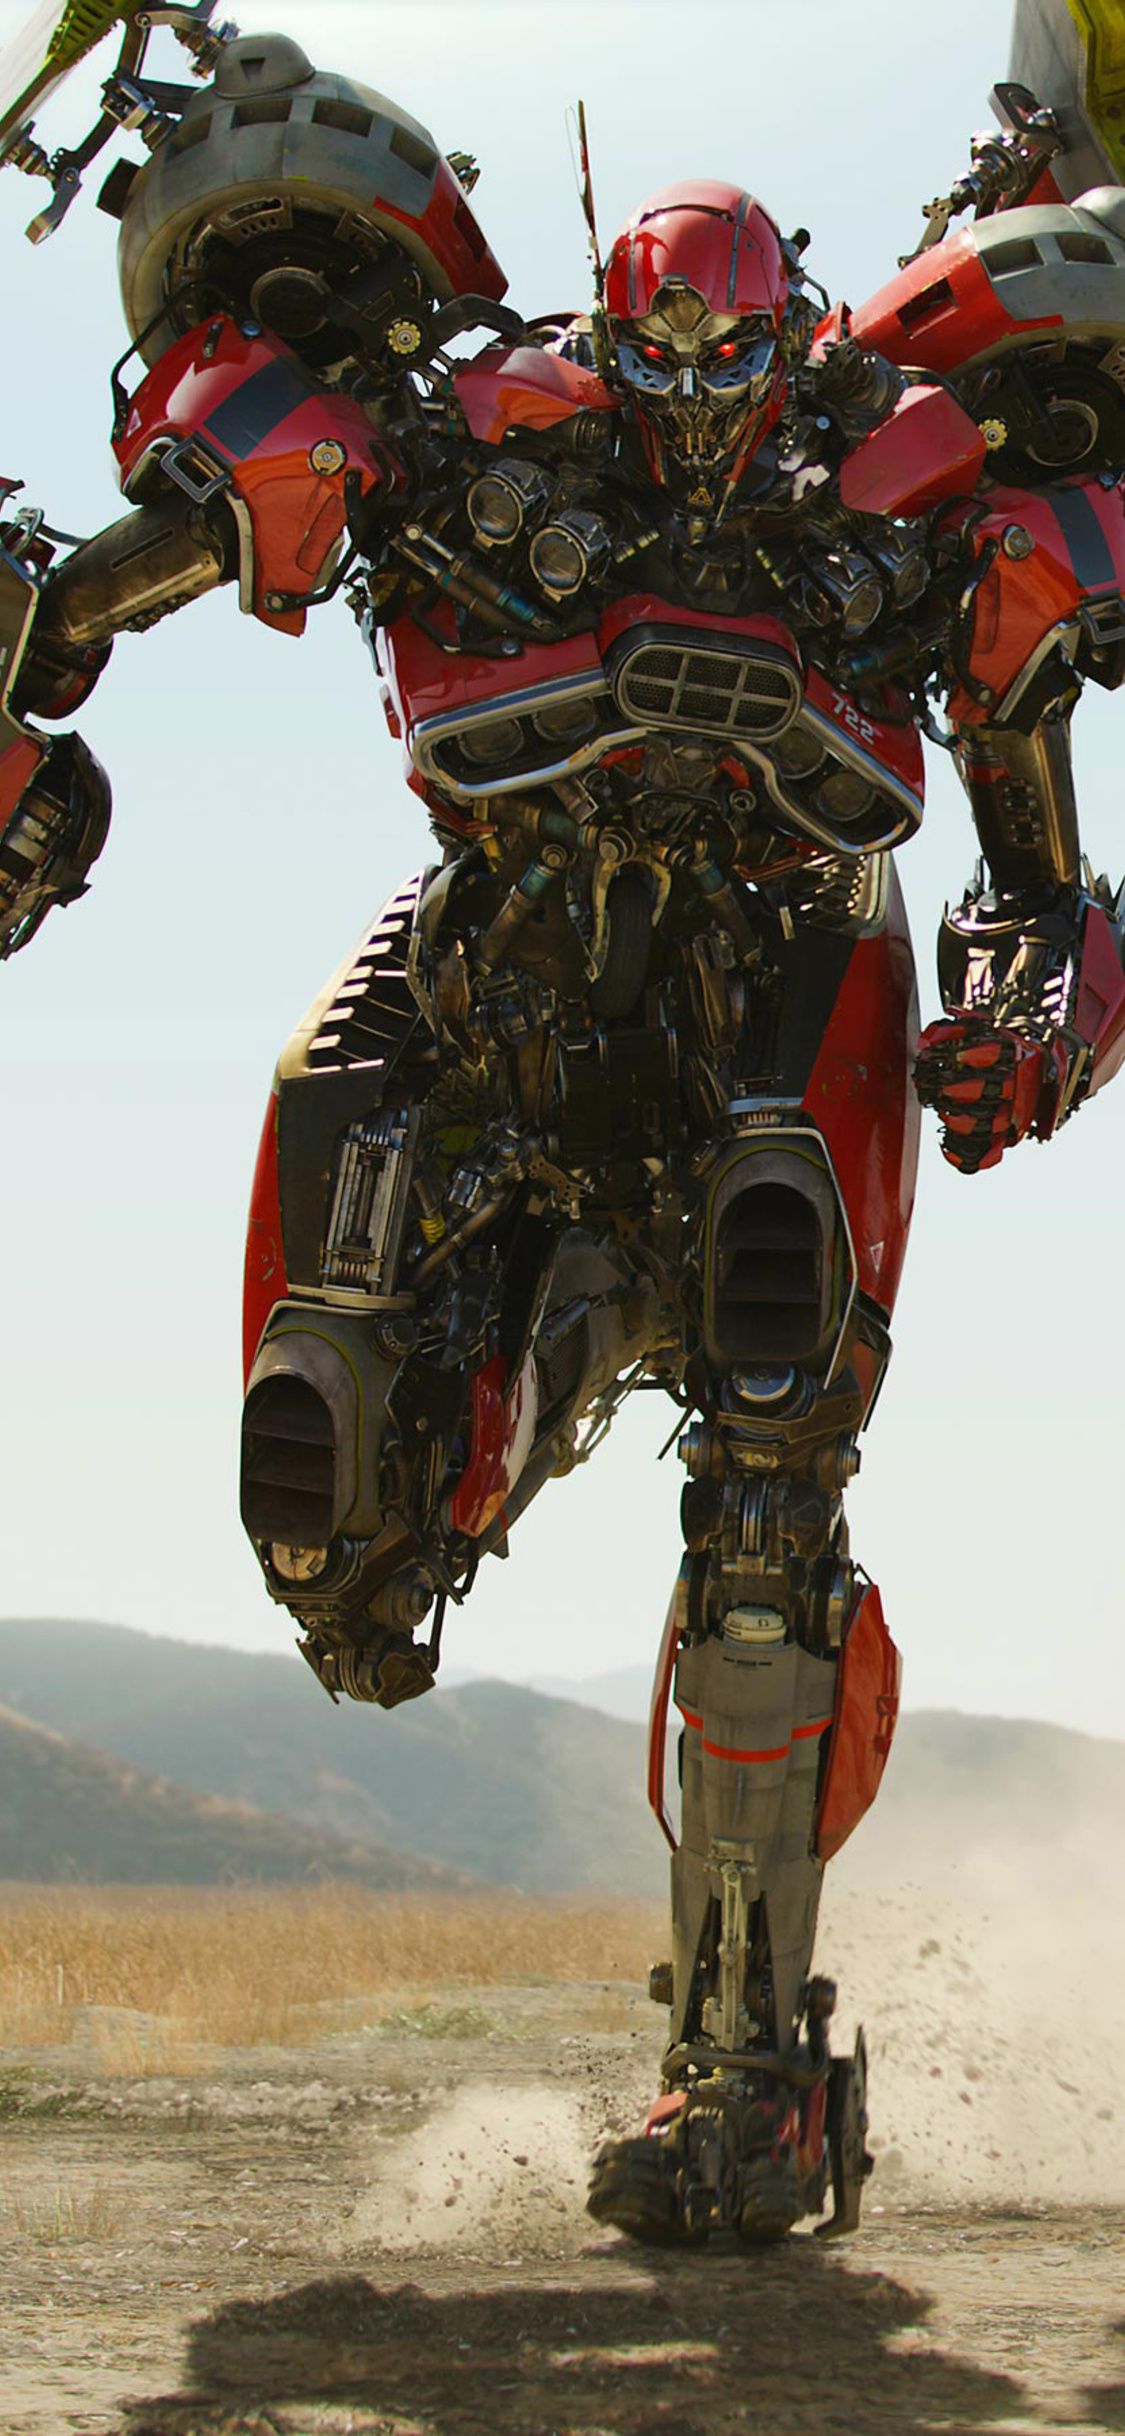 Shatter And Dropkick Decepticon In Bumblebee Movie iPhone XS, iPhone iPhone X HD 4k Wallpaper, Image, Background, Photo and Picture